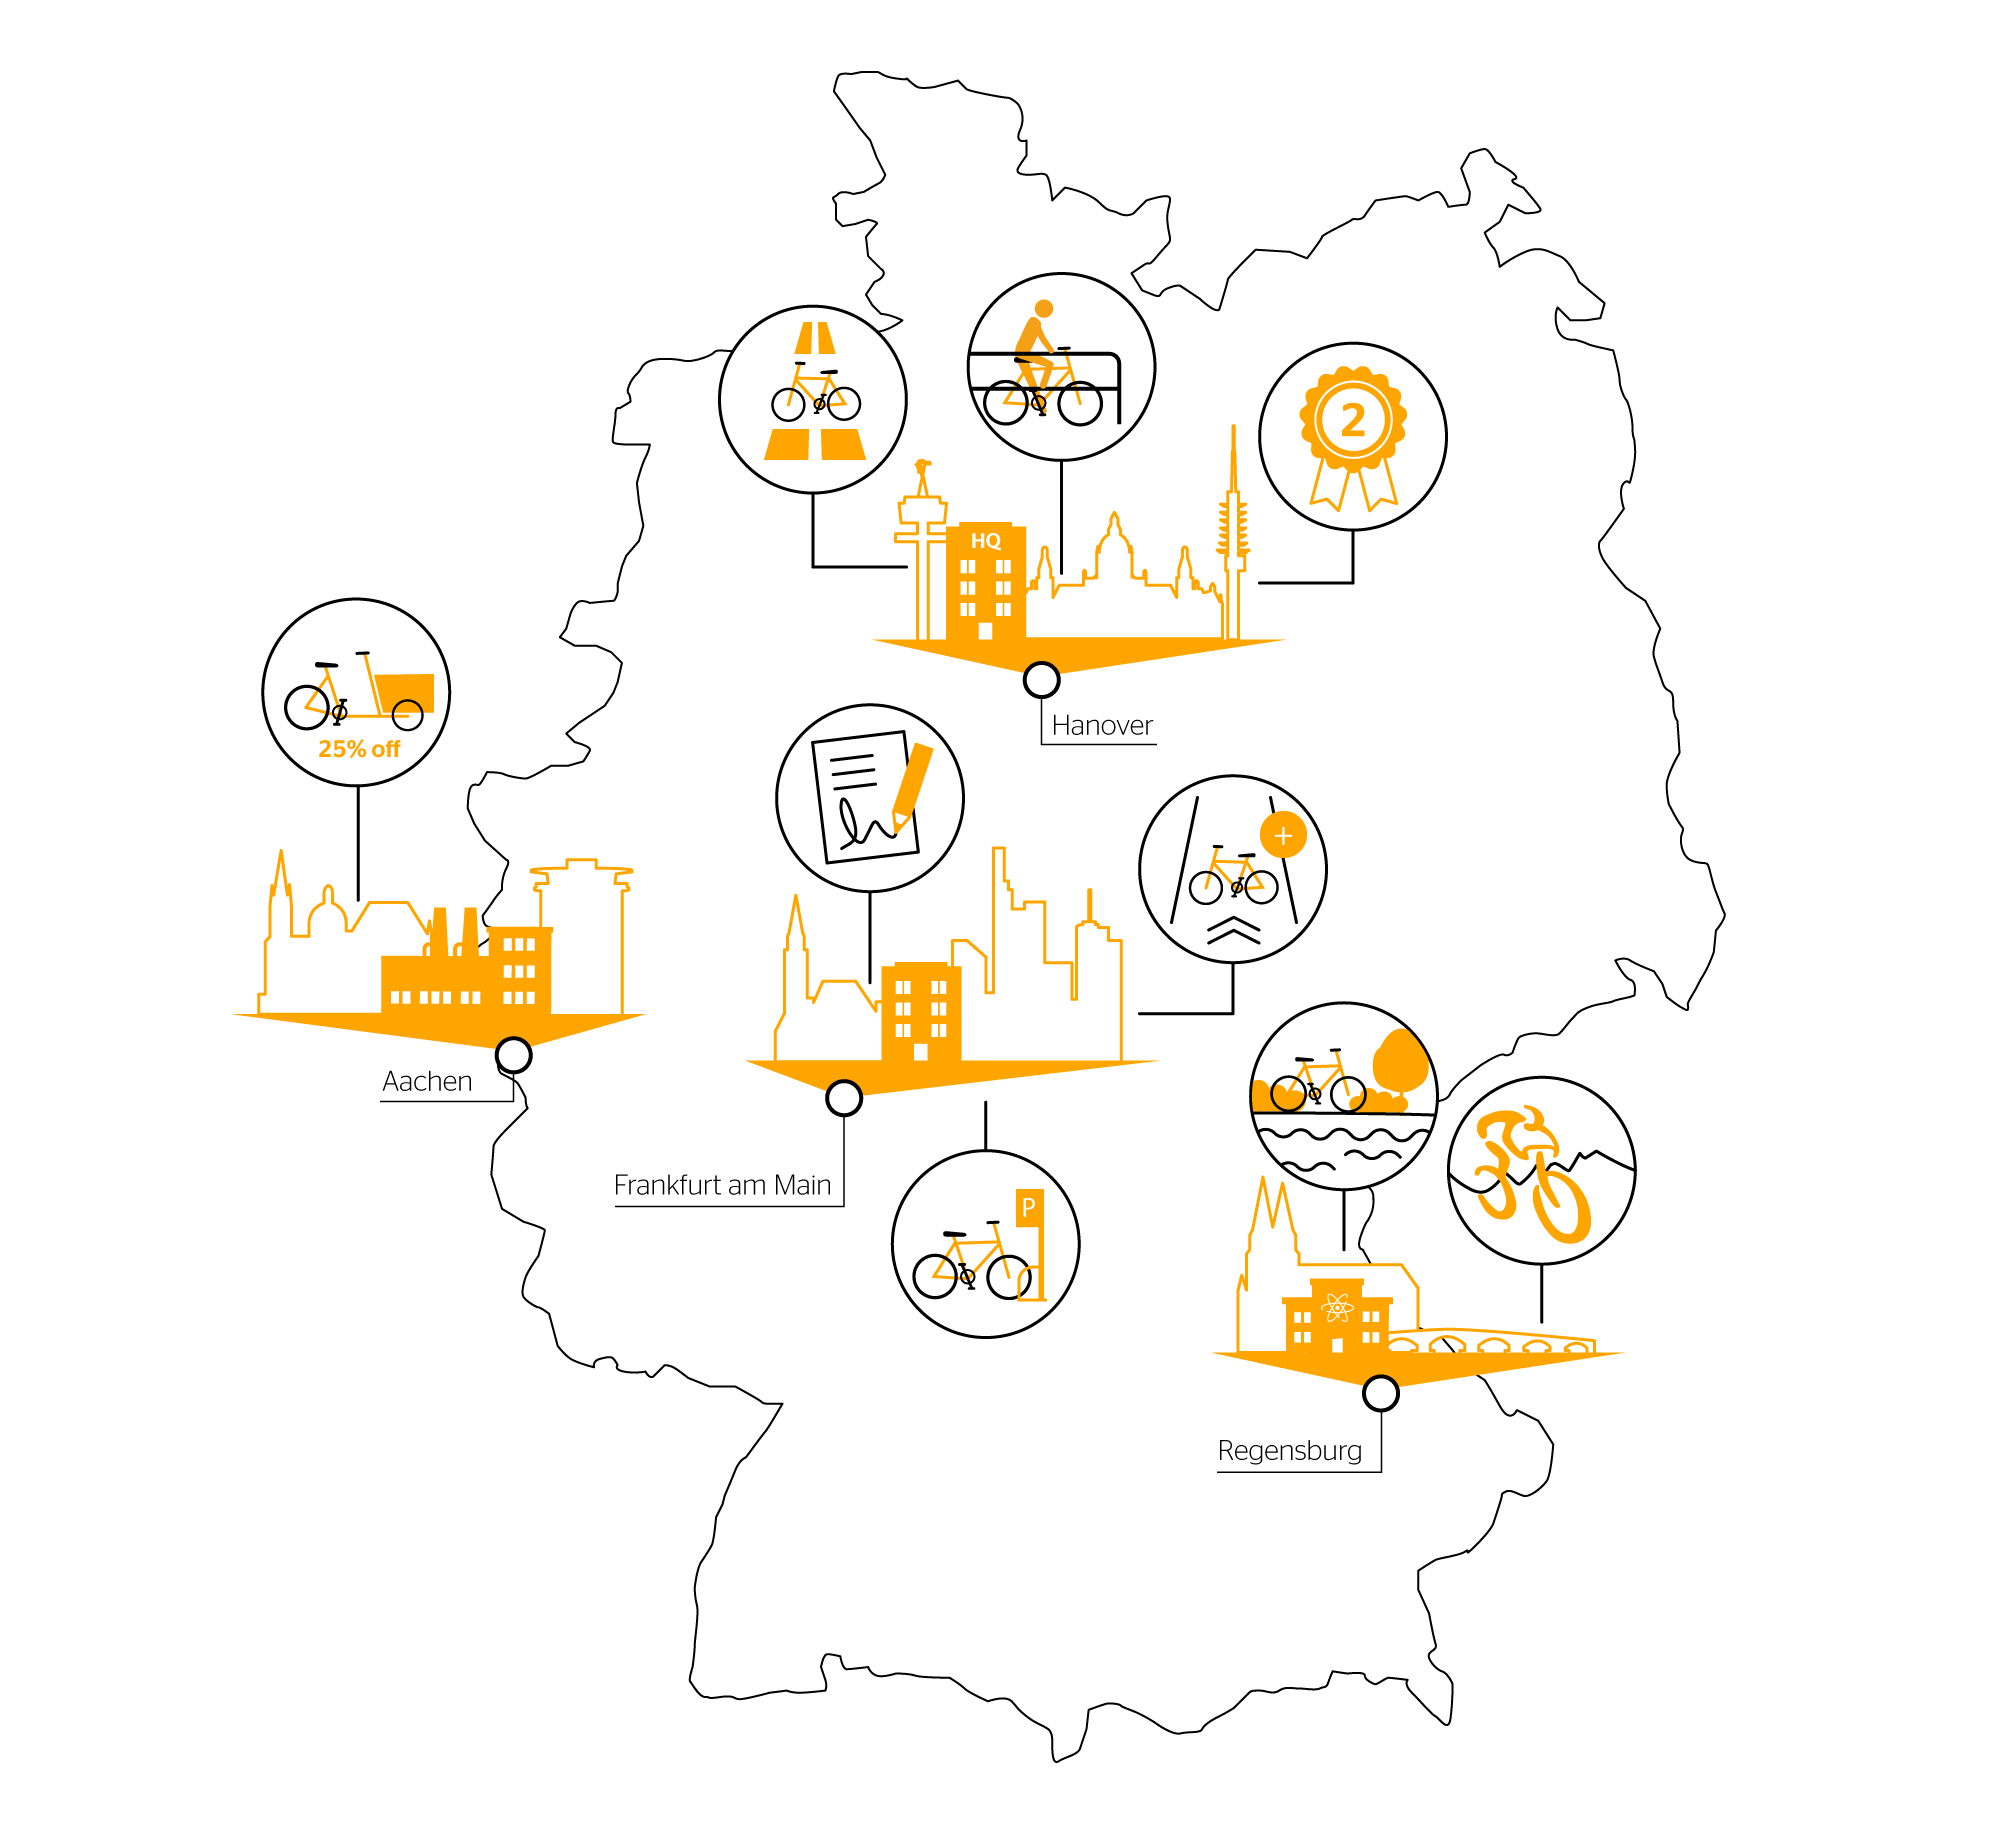 A map of Germany showing continental offices in bike-friendly cities